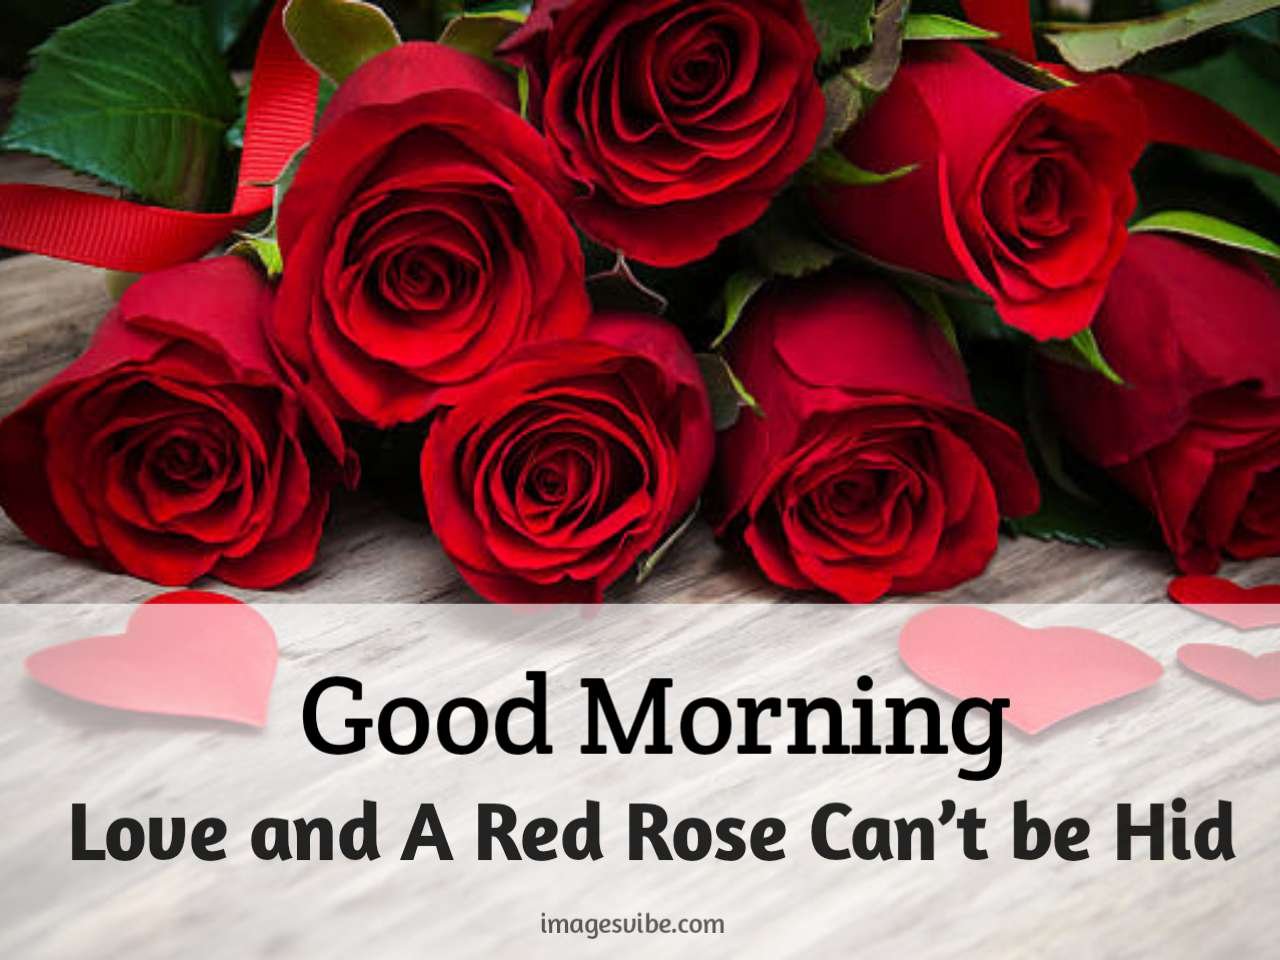 Good Morning Love And A Red Rose Can't Be Hid Image